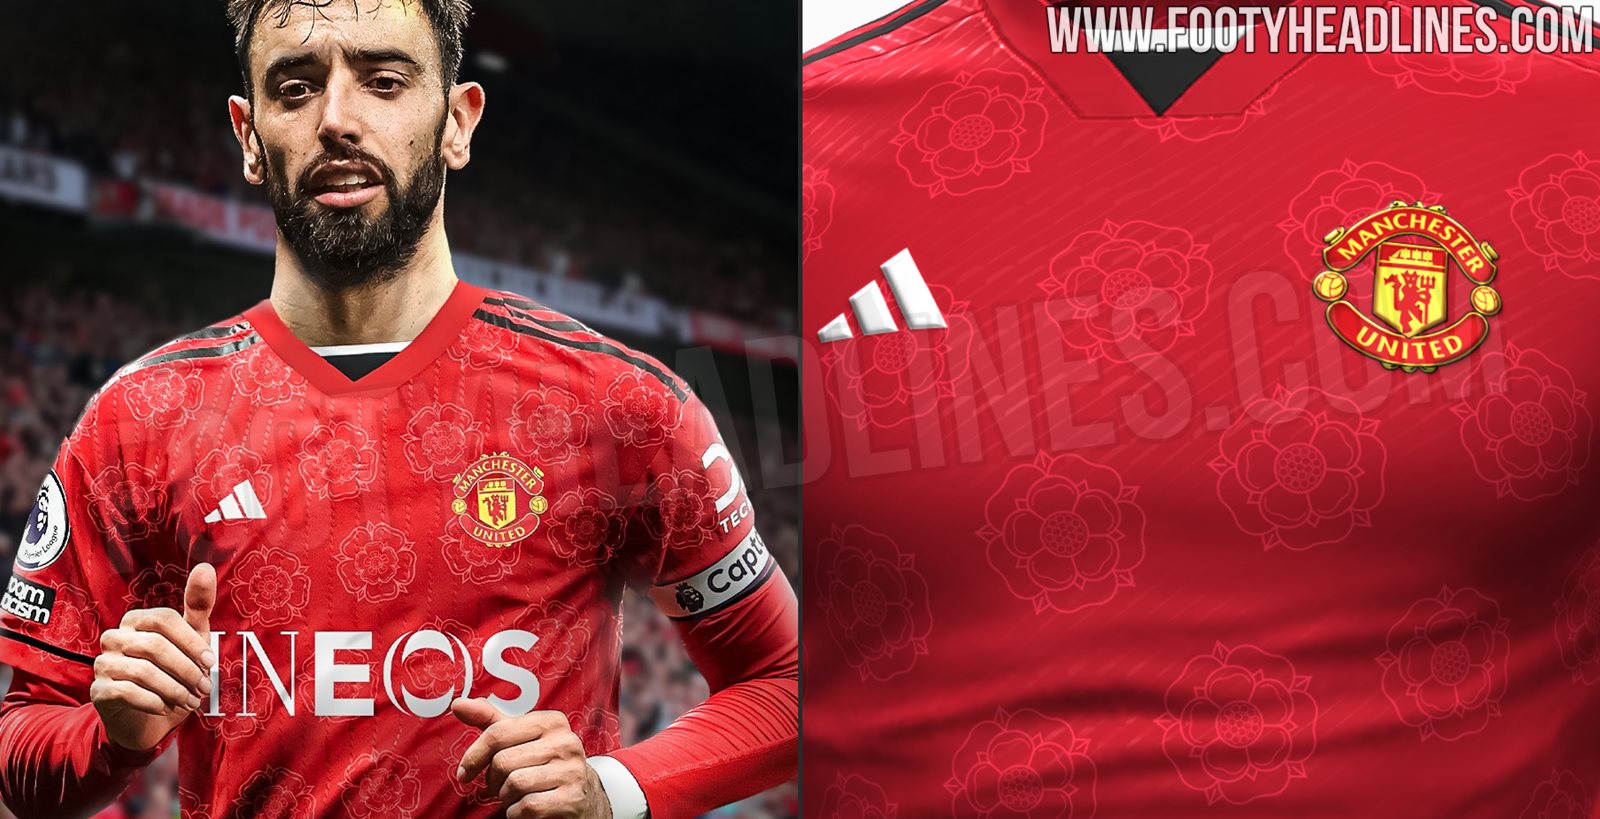 Manchester United 21-22 Home Kit Released - Footy Headlines